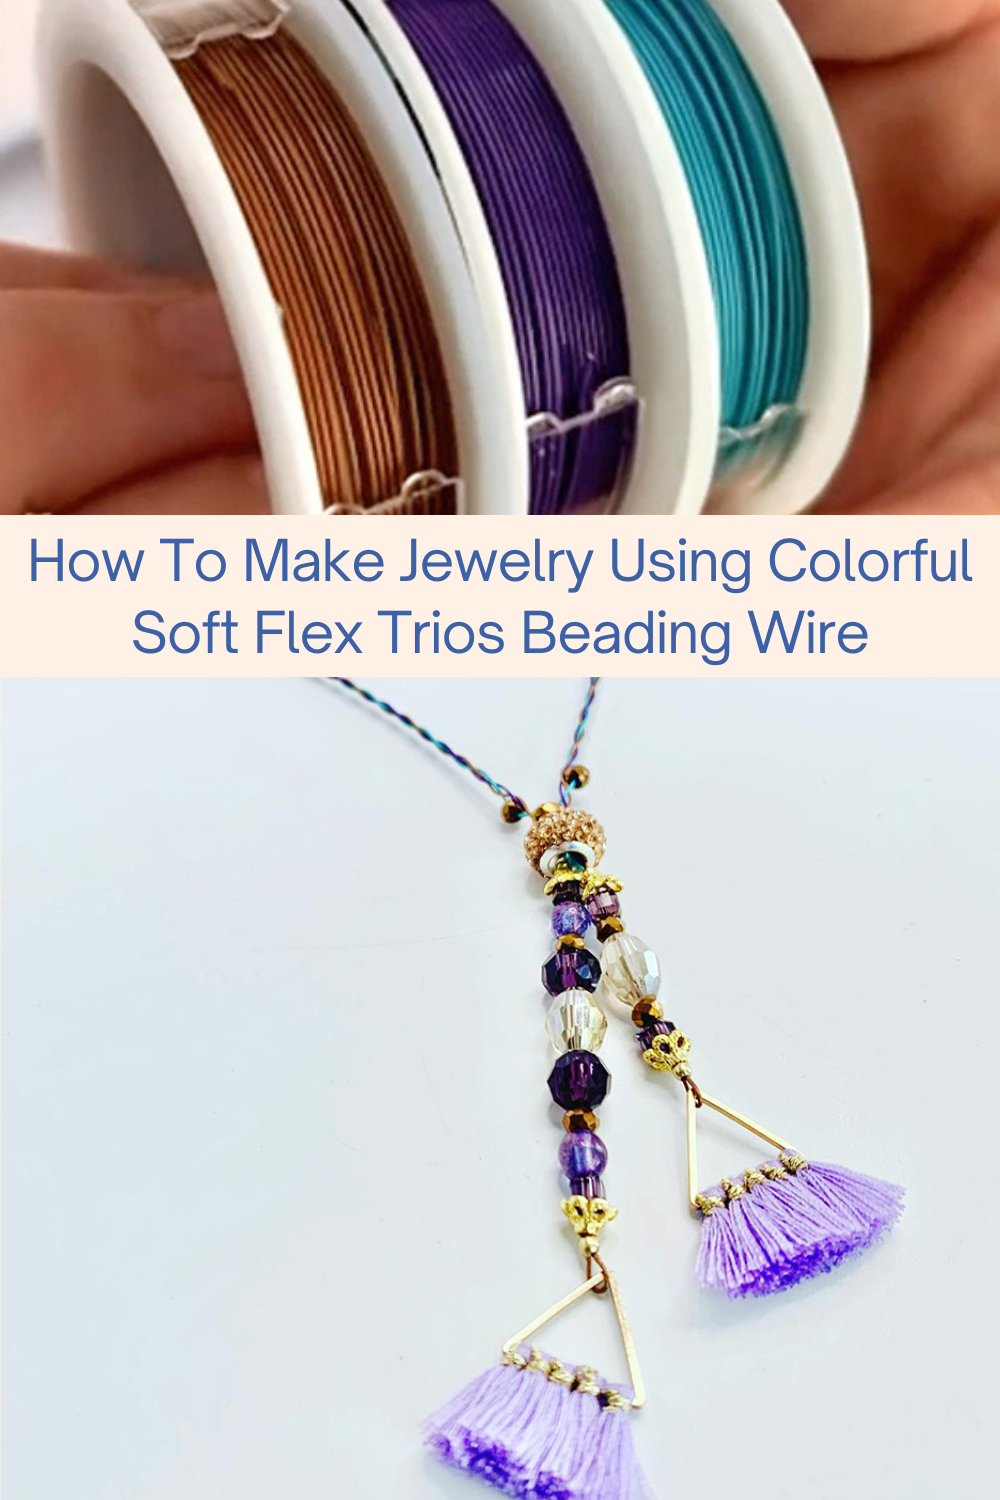 How To Make Jewelry Using Colorful Soft Flex Trios Beading Wire Collage